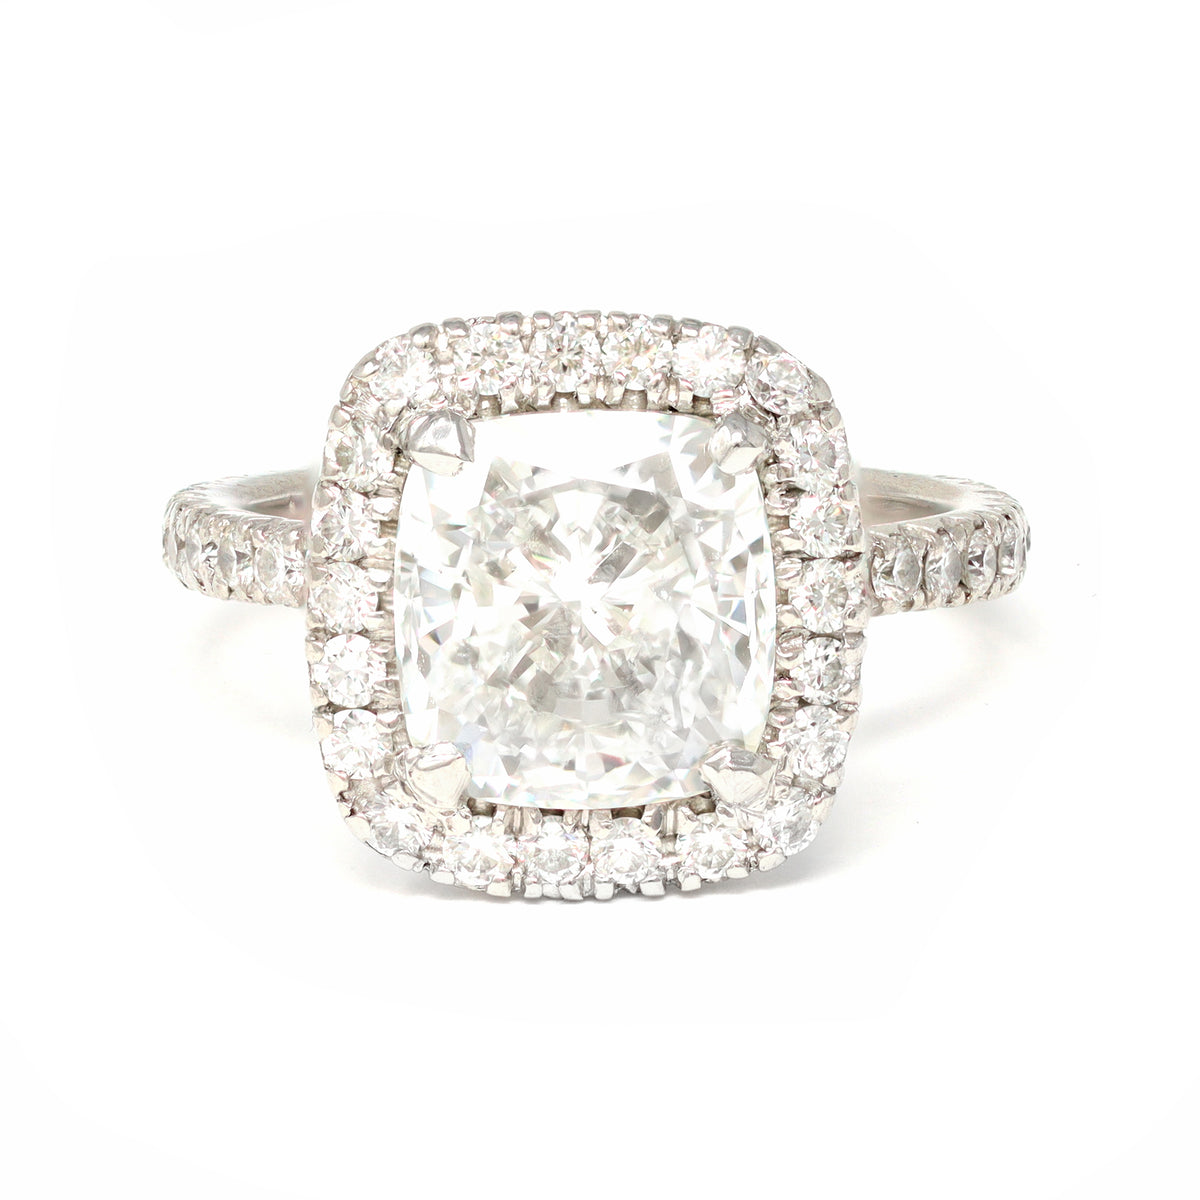 GIA Certified 3.07 Cushion Cut Solitaire Diamond Halo Ring in Platinum top view